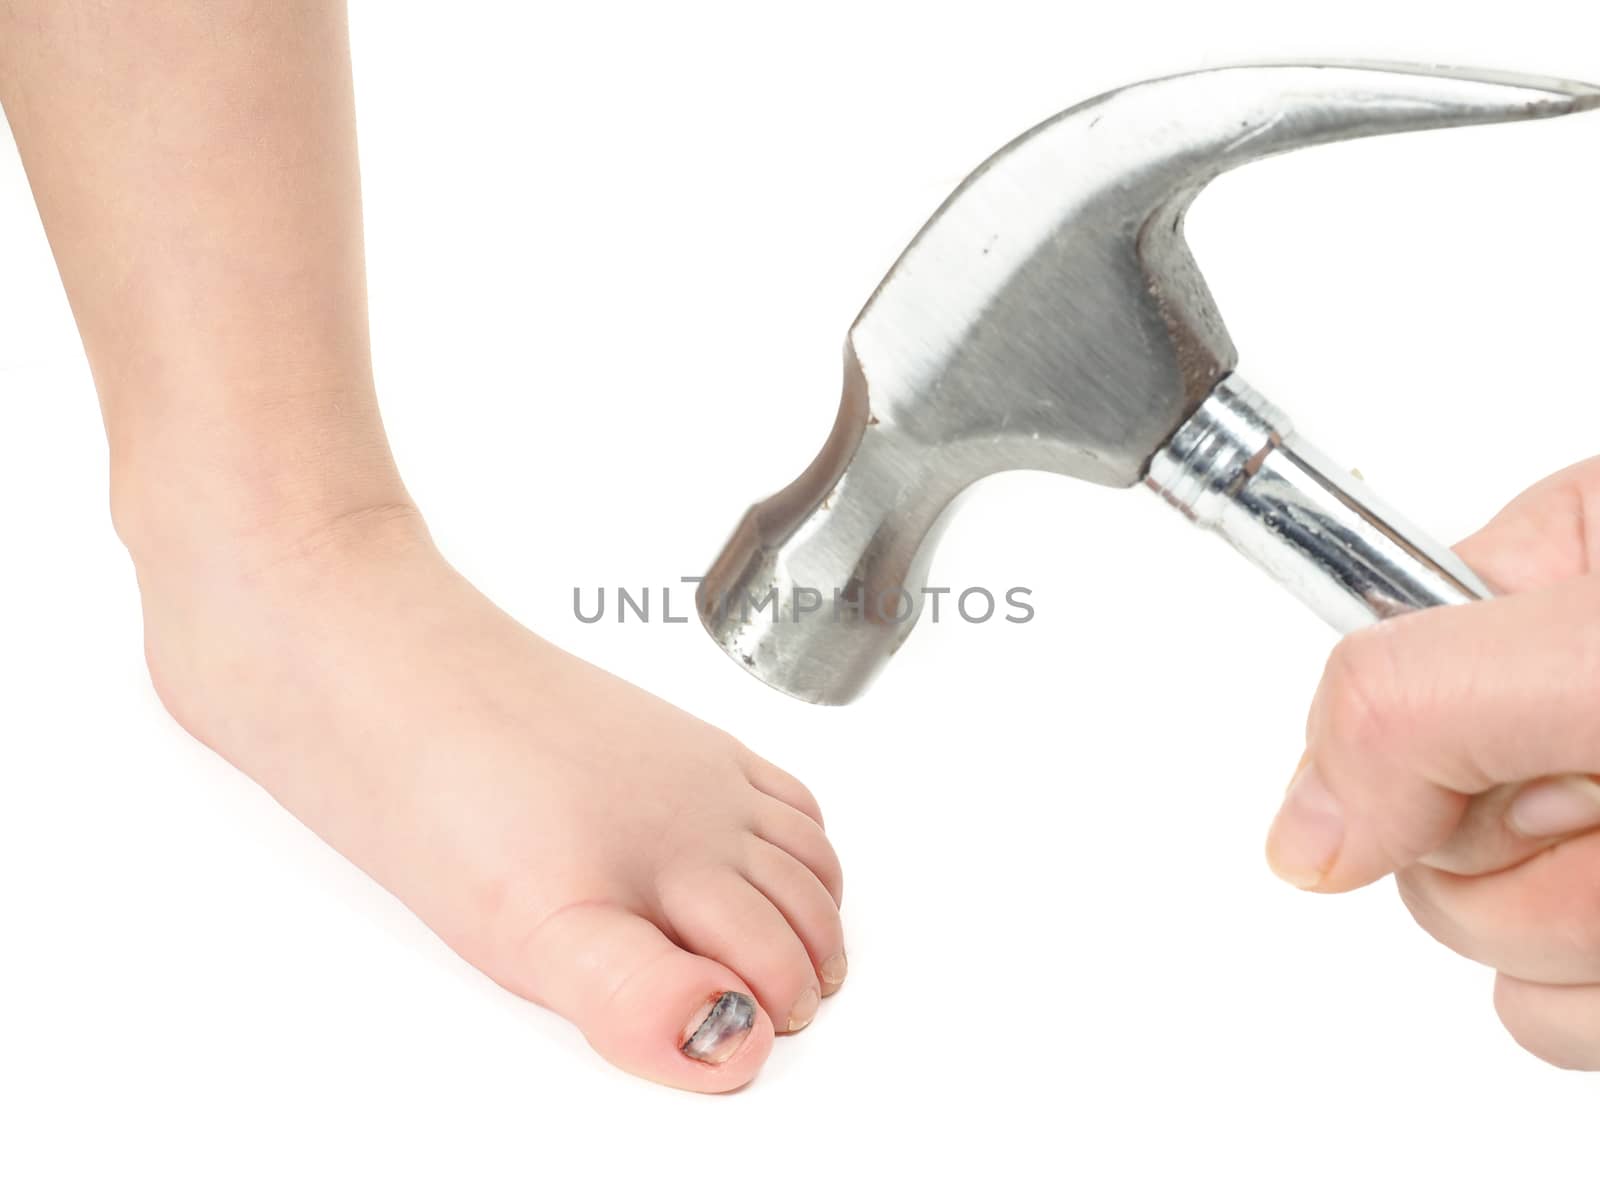 Hammer over a child's foot with blue nail on big toe by Arvebettum